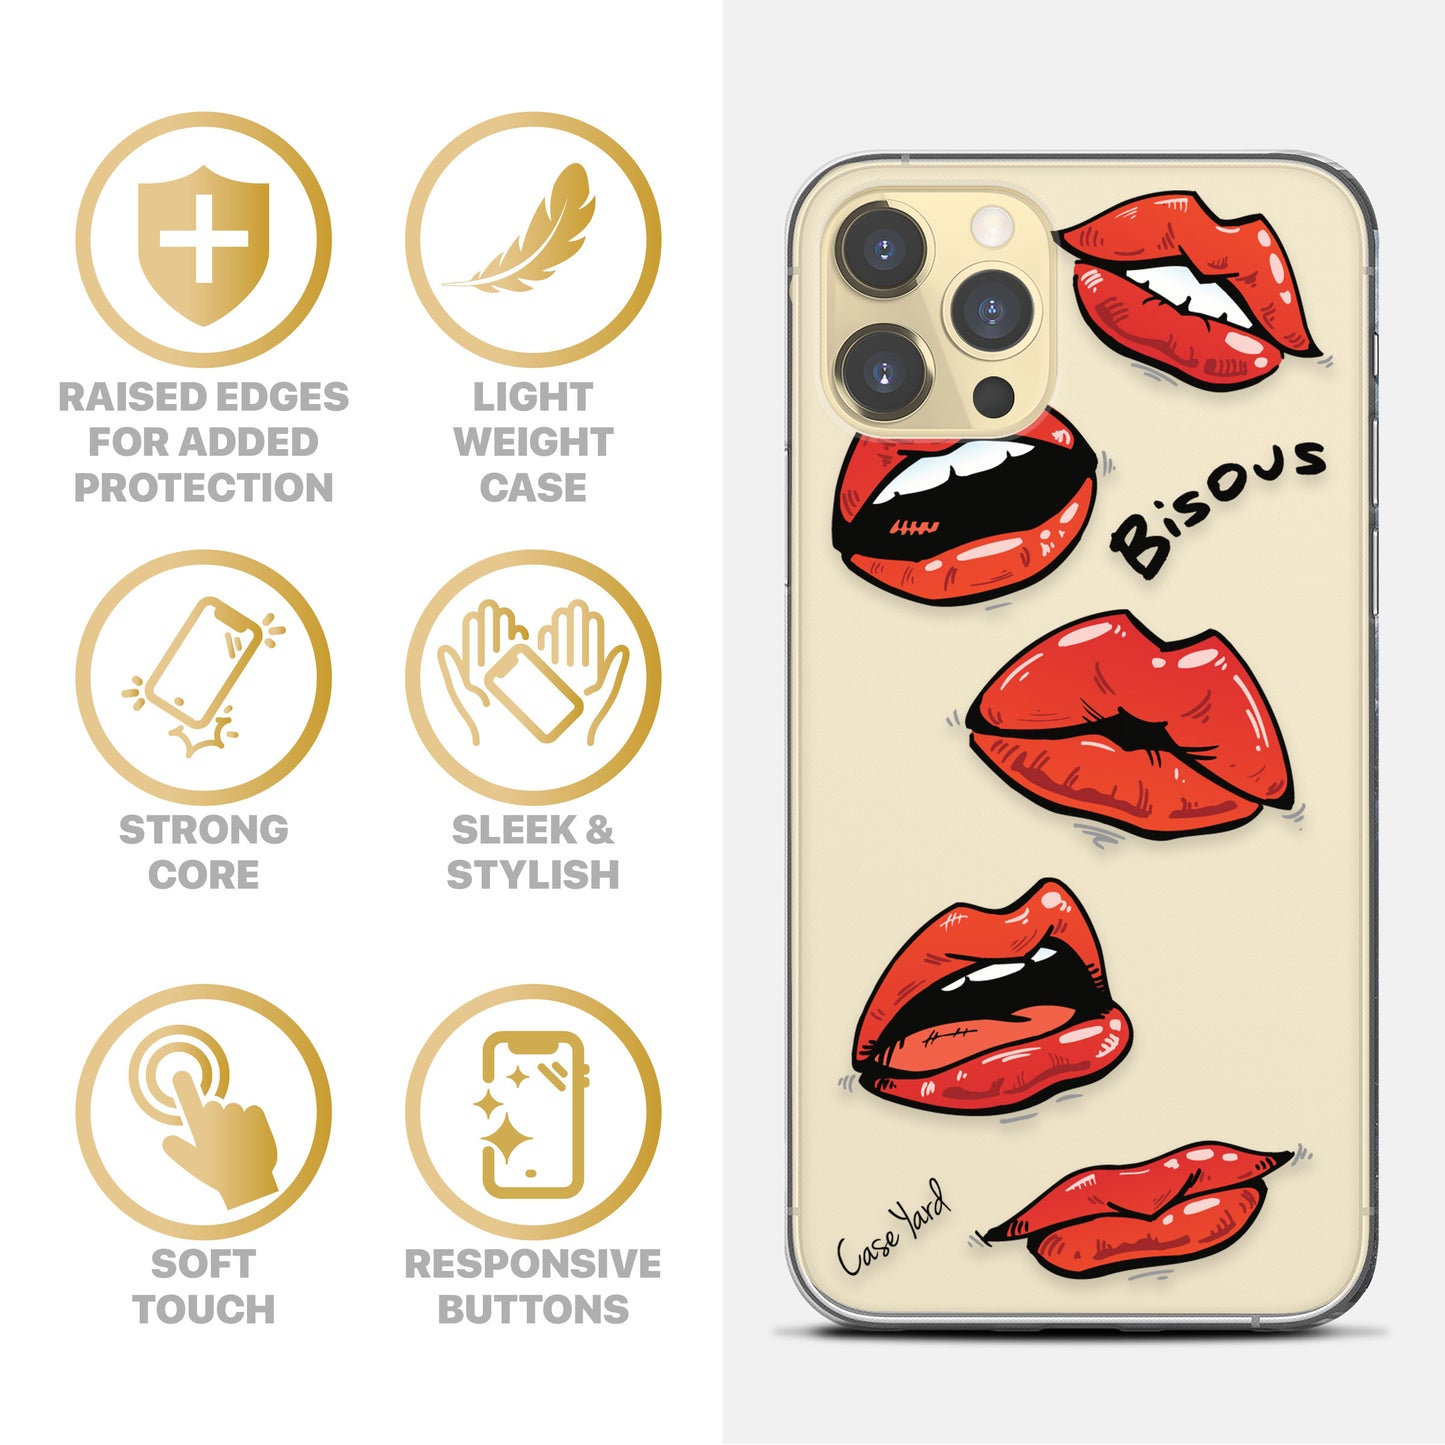 TPU Clear case with (Lips Bisous) Design for iPhone & Samsung Phones